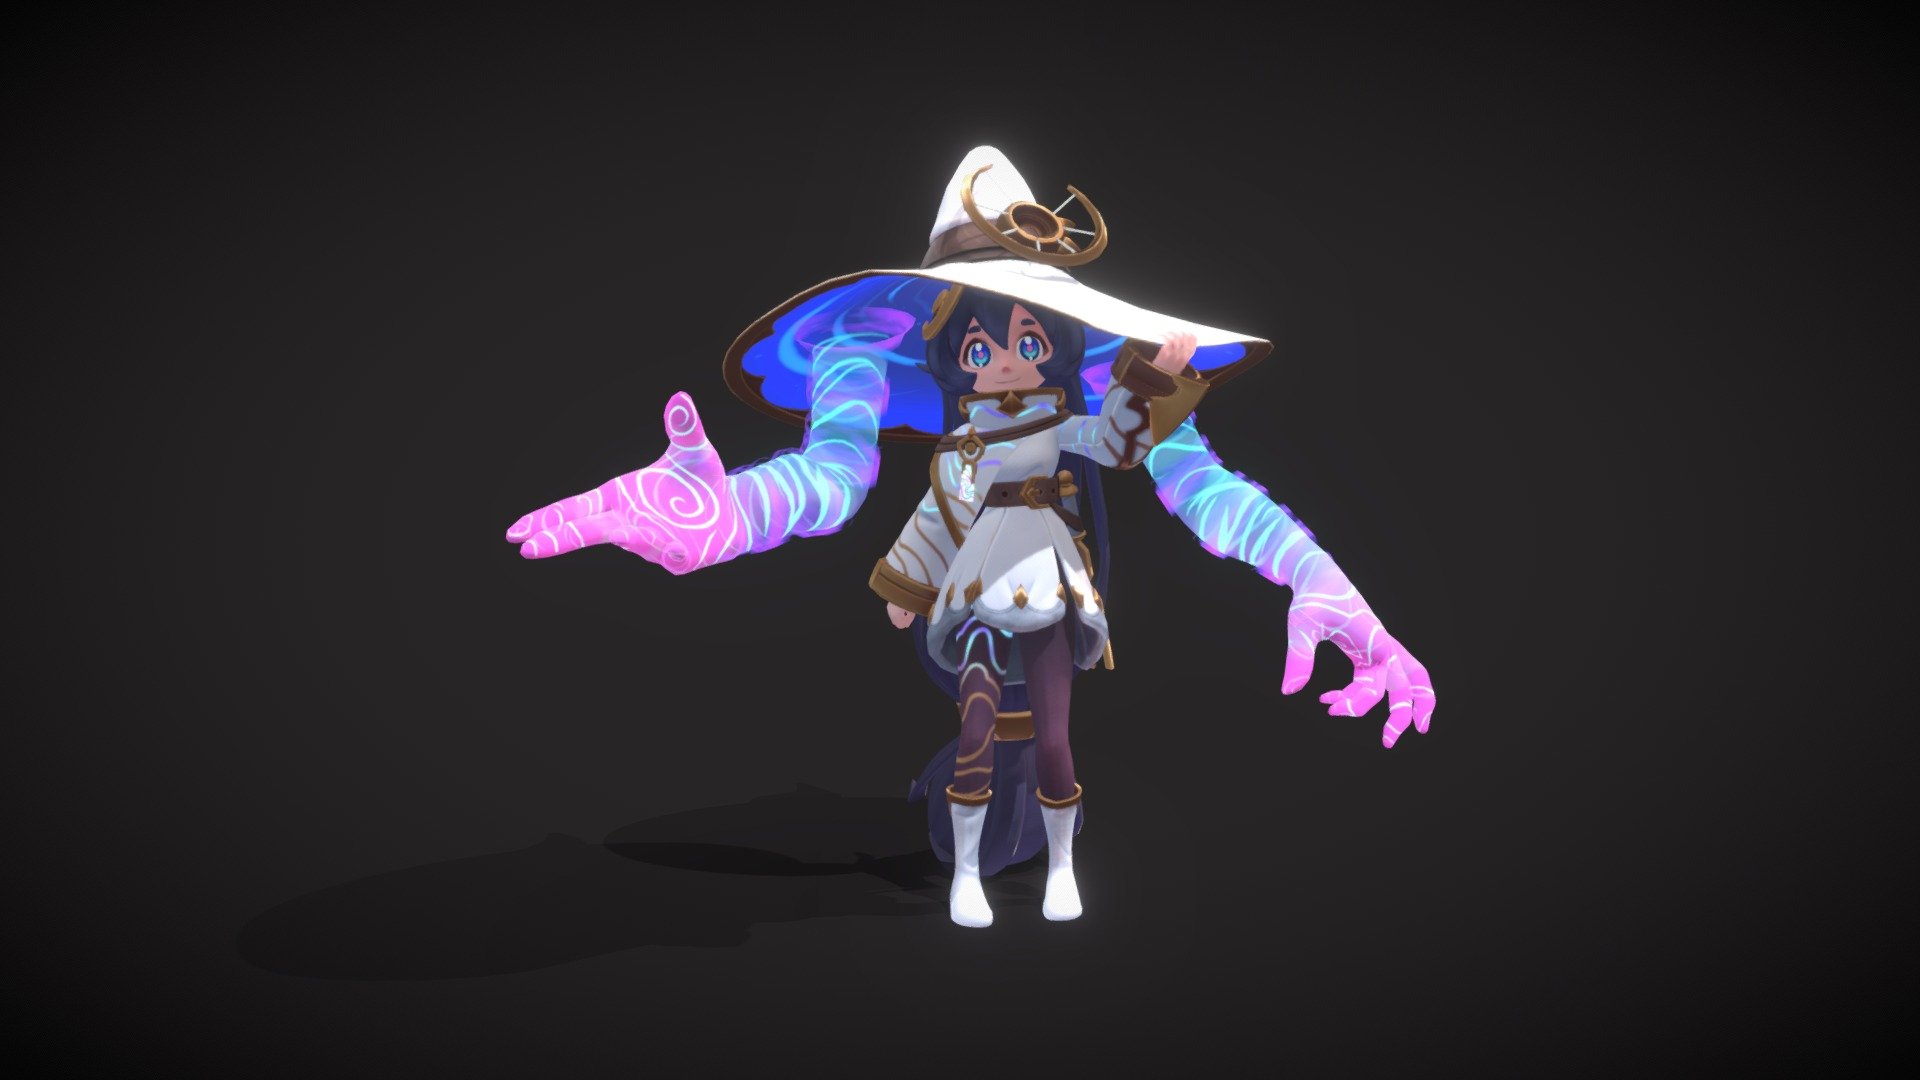 This is a model of a character designed by Alexis Pflaum: https://twitter.com/Alexis_Pflaum - Ystra - Astral Witch - 3D model by theStoff 3d model